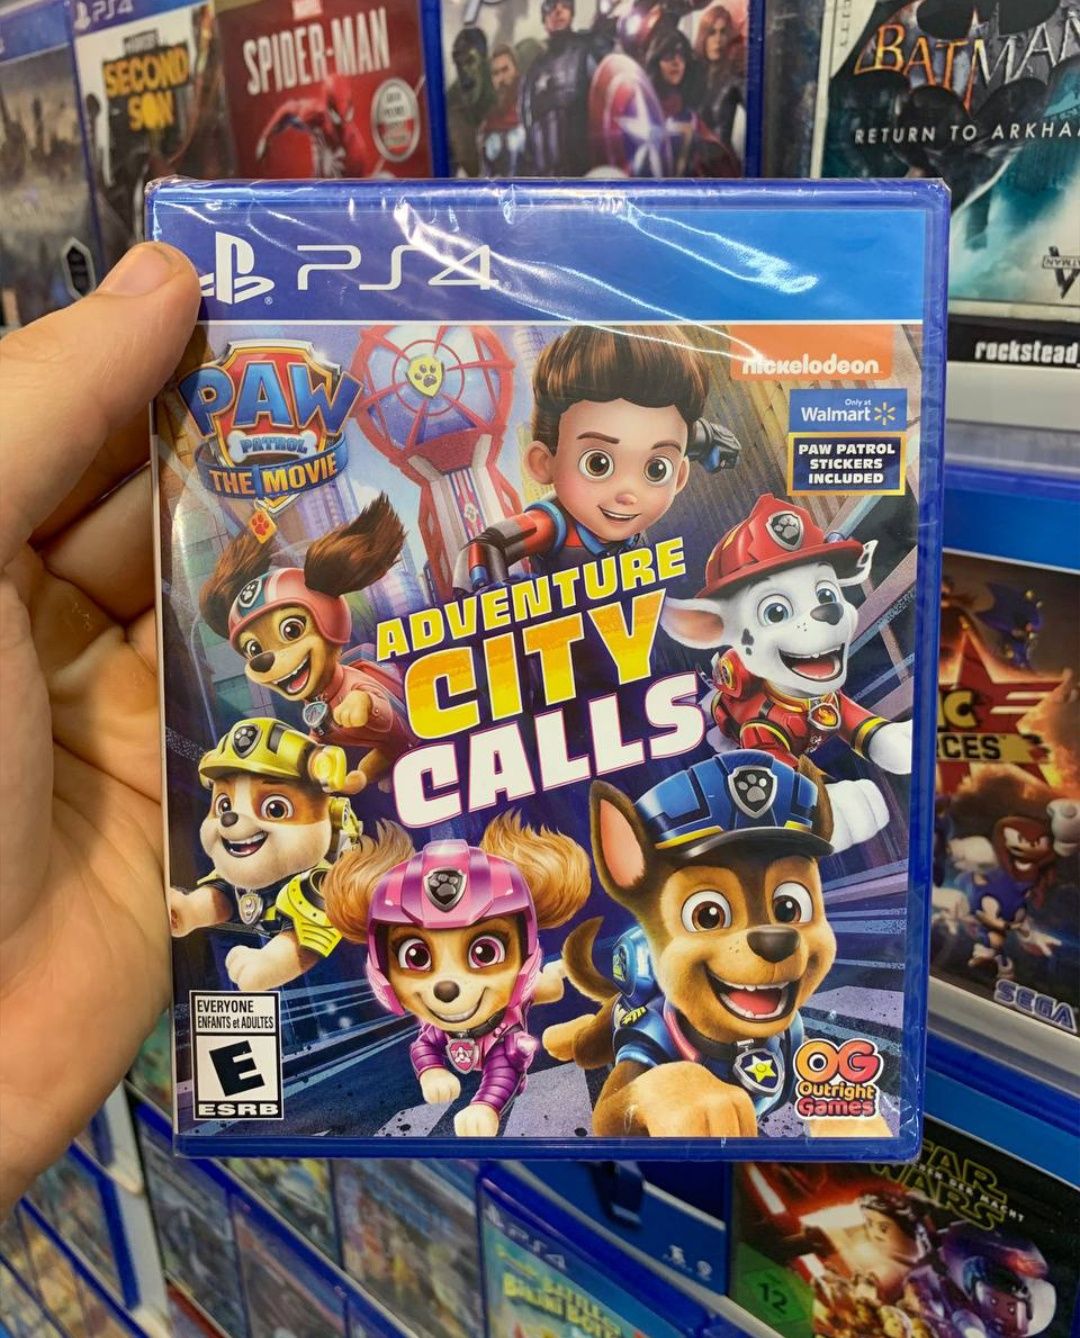 Paw Patrol The Movie Adventure City Calls, Ps4 PS5 igame